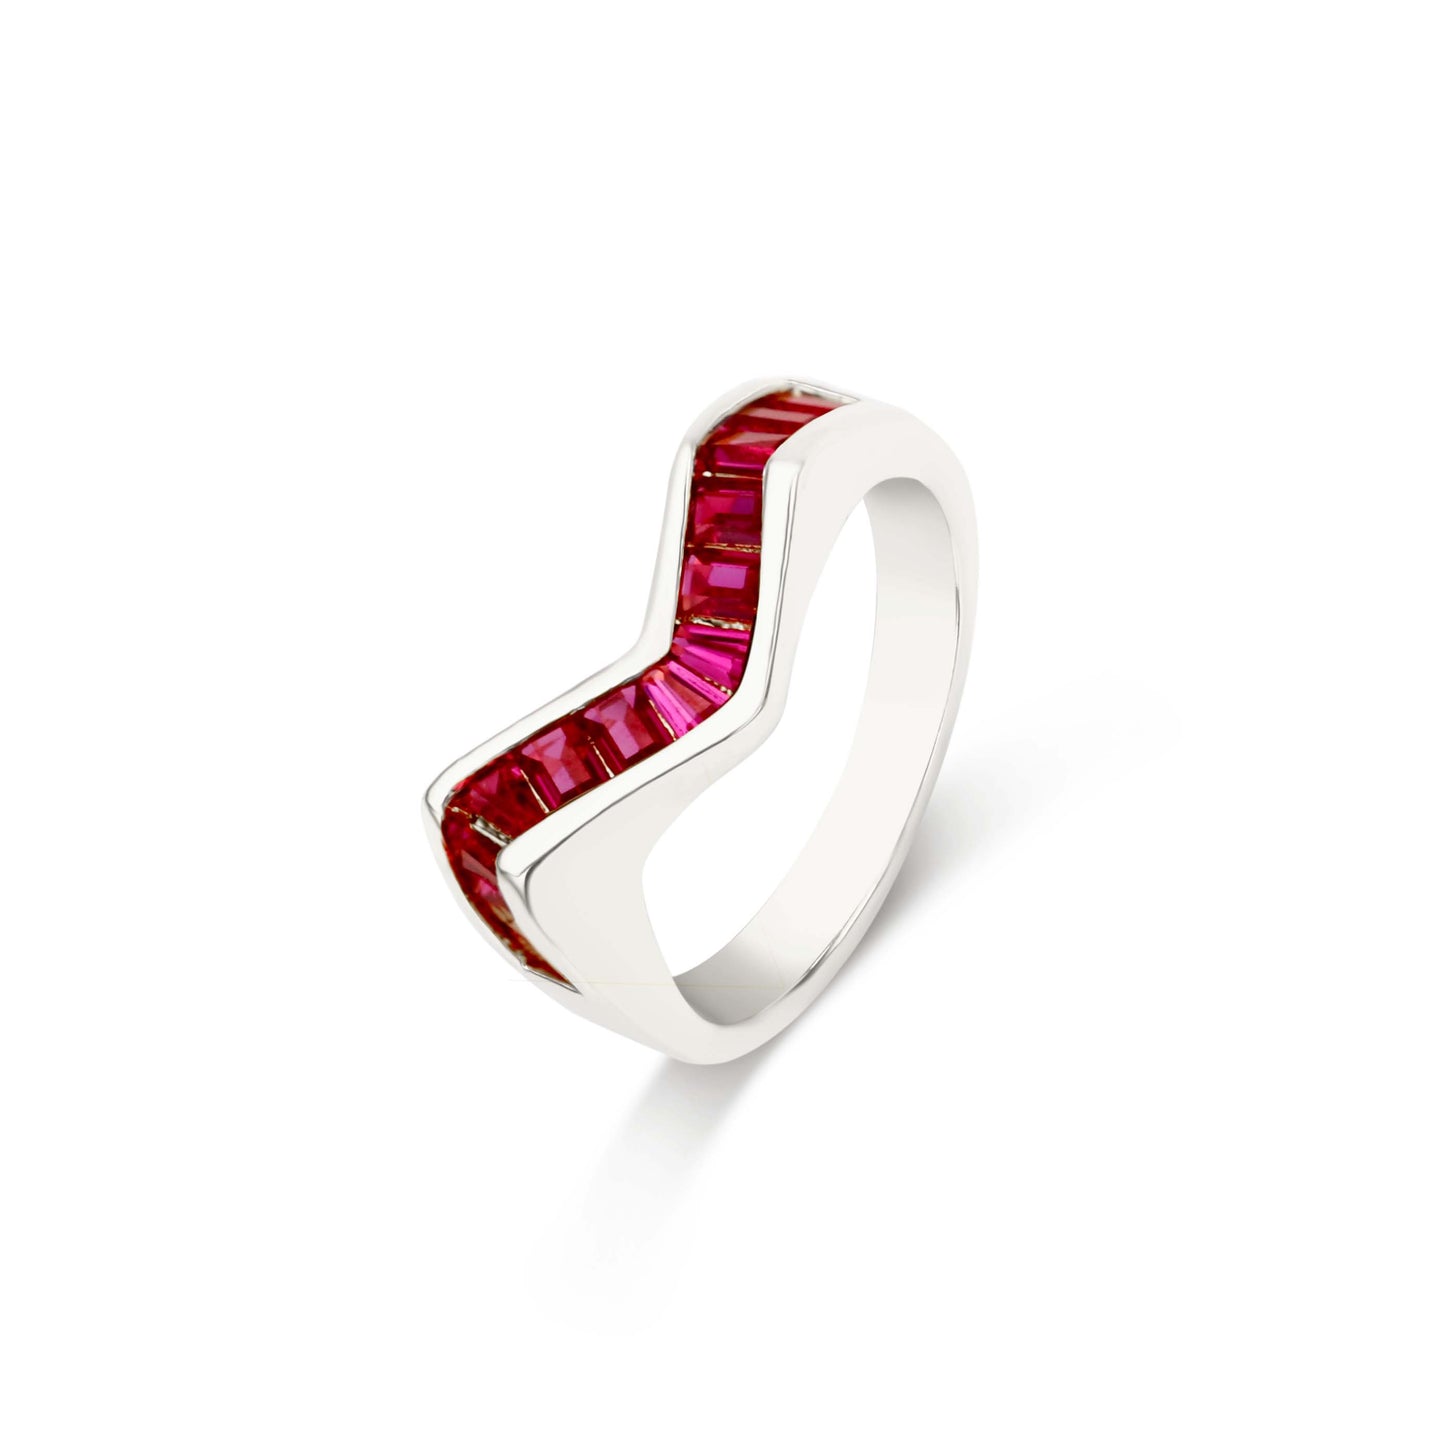 PINK UNIQUE RING | Fourfold 18K White Gold Plated